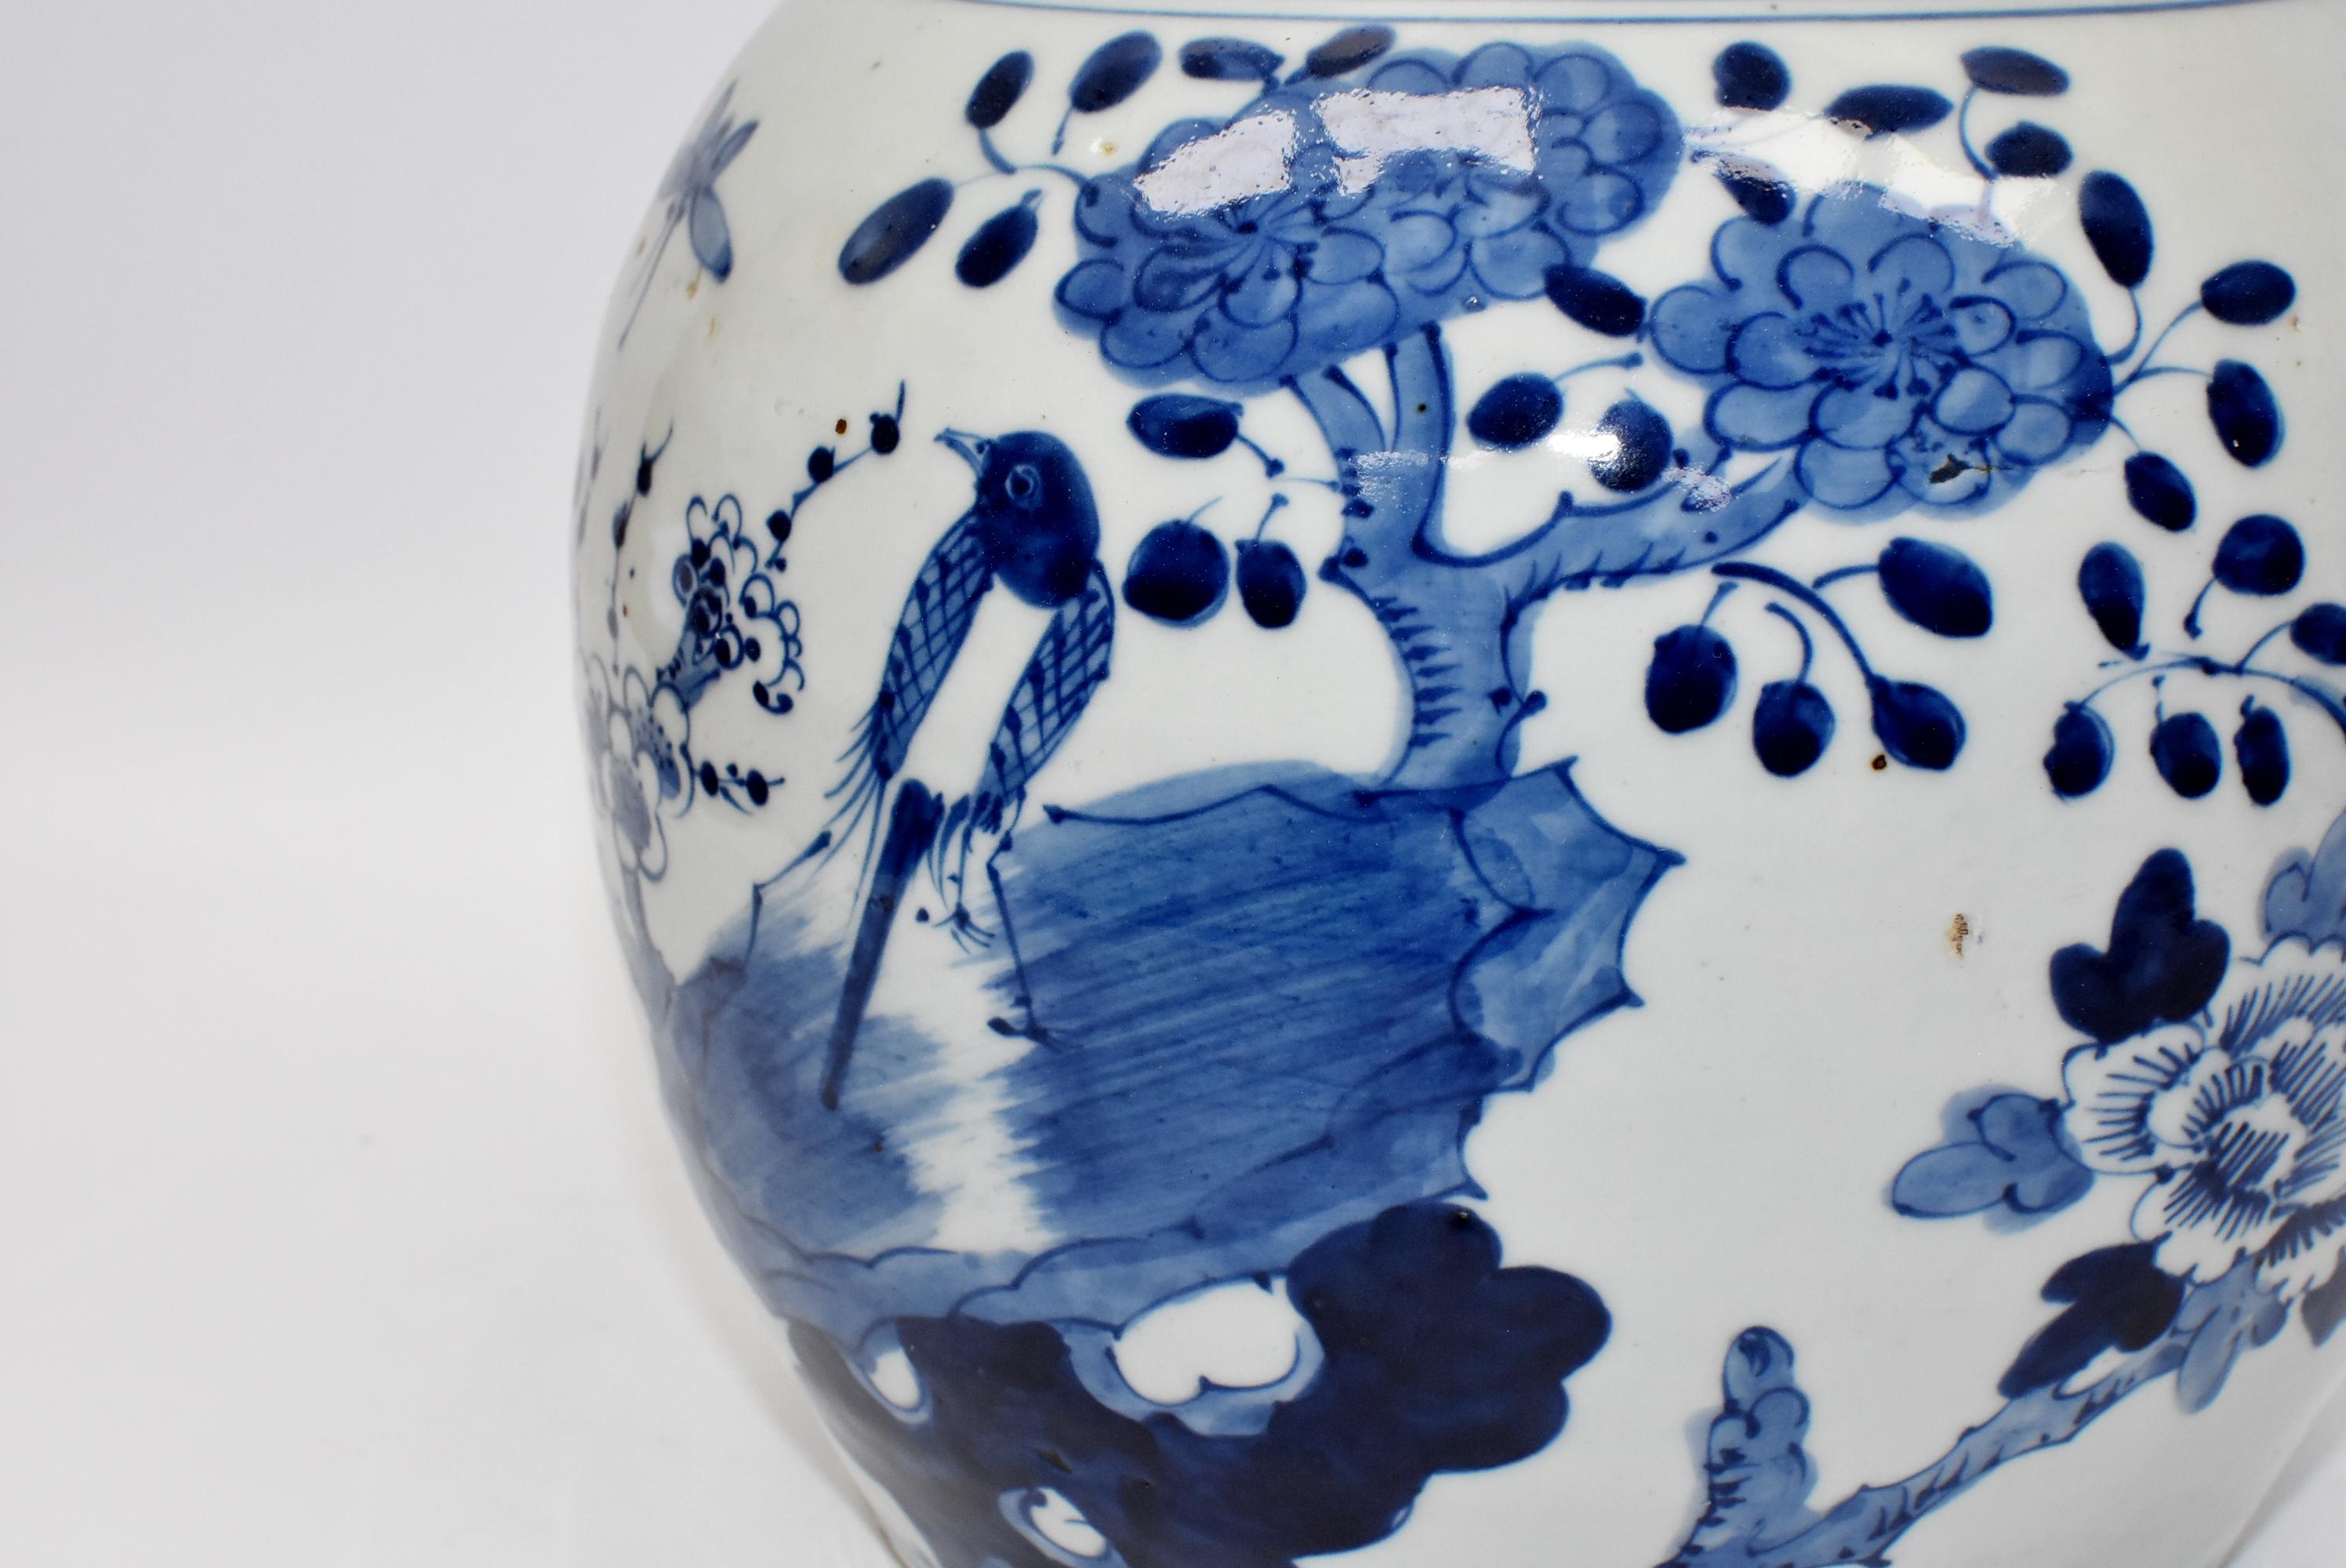 A beautiful 20th century Chinese blue and white ginger jar depicting a magpie resting on the rock under a plum blossom tree with a butterfly in the sky and peonies blooming. A ring of eternity scrolls decorate the area near the opening. Images are